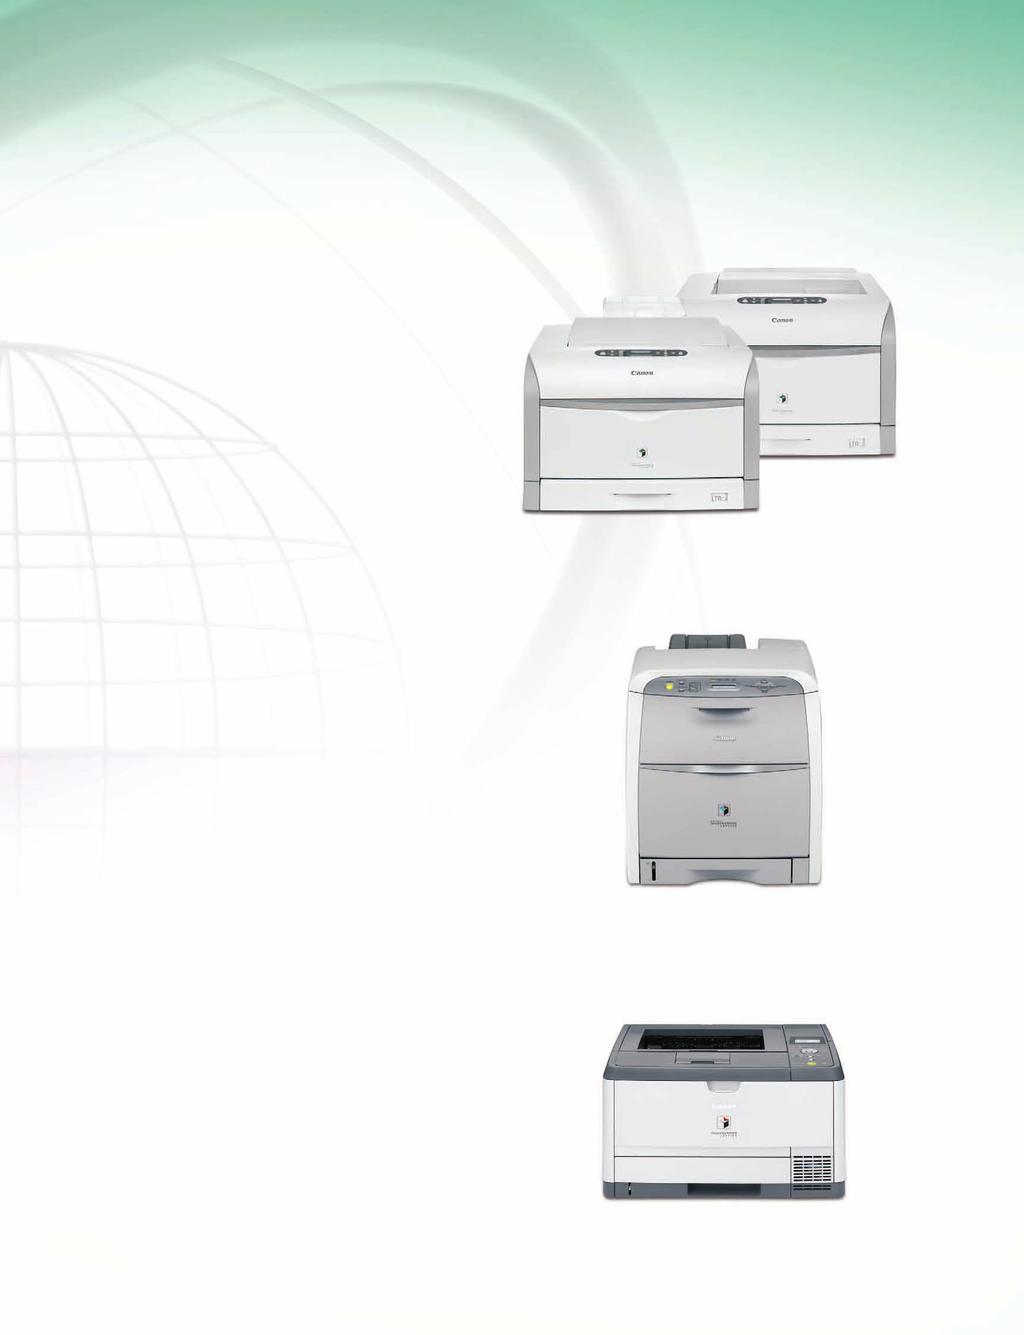 A HIGHER STANDARD FOR DESKTOP PRODUCTIVITY Four strong models that meet the demands of any corporate workgroup The Canon Color imagerunner LBP5975/5970/5360 and imagerunner LBP3460 can handle a broad